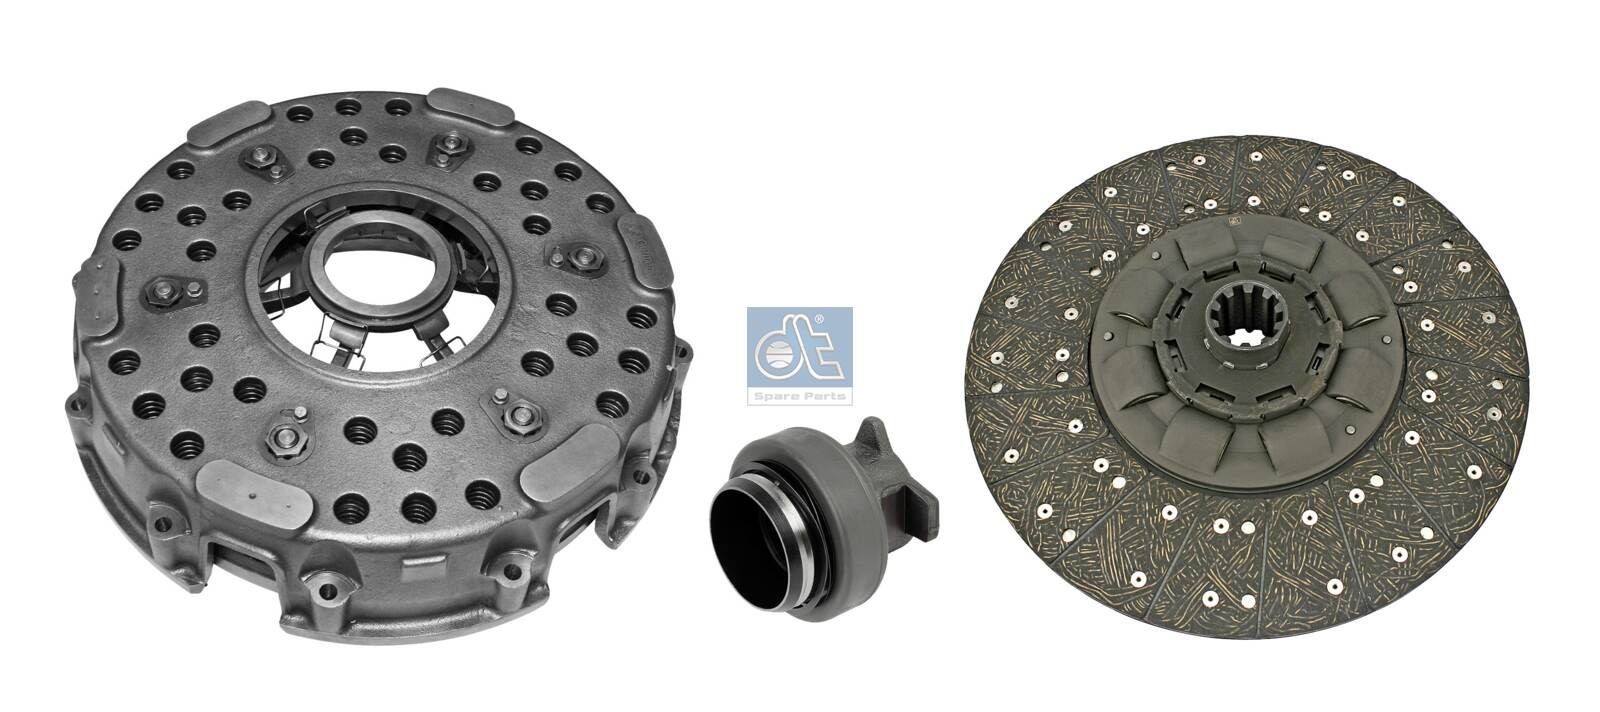 3400 700 346 DT Spare Parts 430mm Ø: 430mm Clutch replacement kit 4.92054 buy